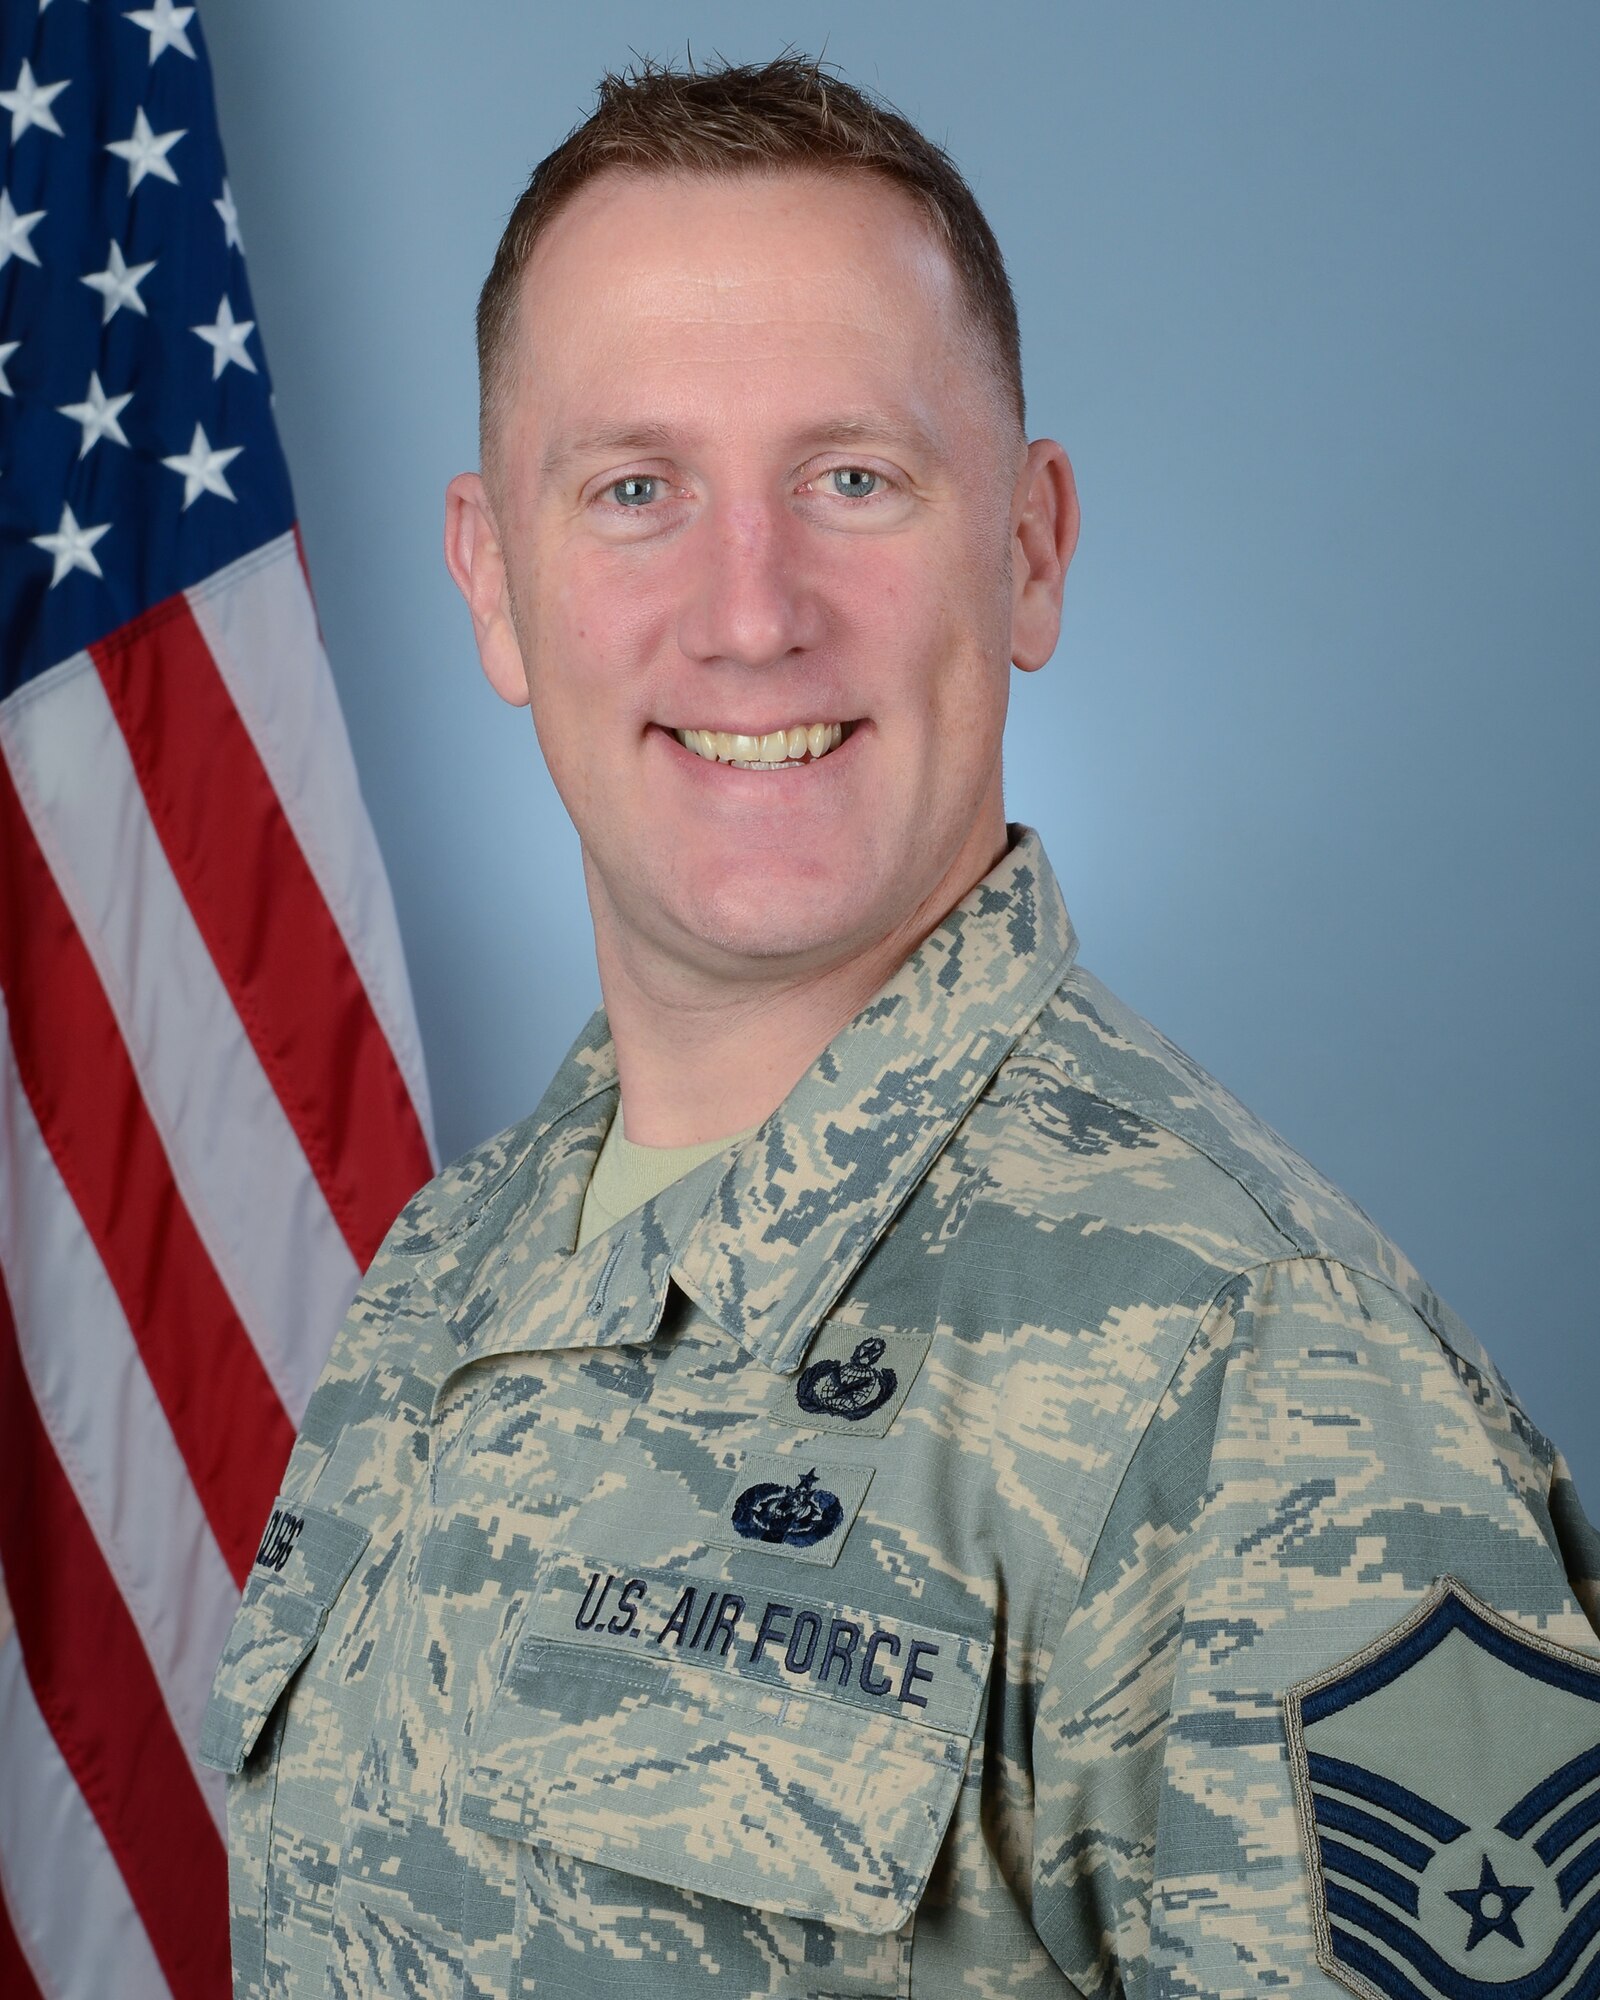 U.S. Air Force Master Sgt. Carl Clegg, a broadcast journalist assigned to 169th Fighter Wing, at McEntire Joint National Guard Base, S.C, March 3, 2018. He was selected as the 169th Fighter Wing's Senior NCO-traditional for 2017. (U.S. Air National Guard photo by Senior Airman Megan Floyd)